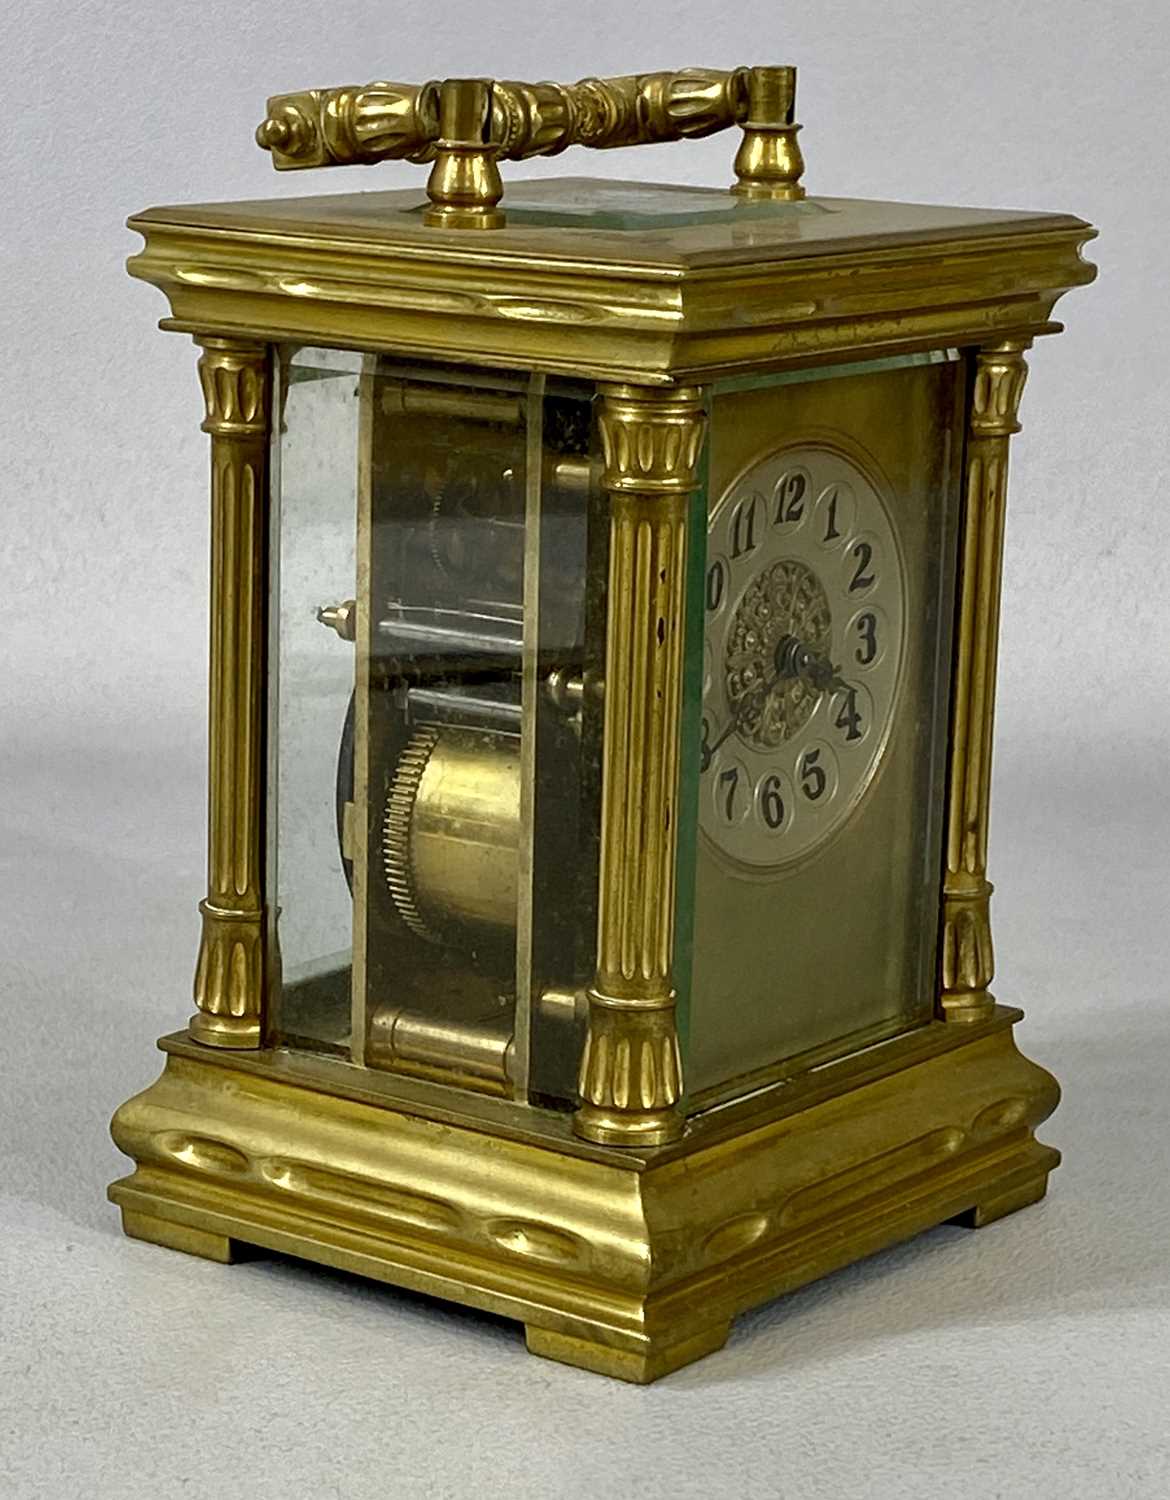 GILT BRASS CASED CARRIAGE CLOCK, late 19th century with fluted columns, circular silvered dial - Image 2 of 4